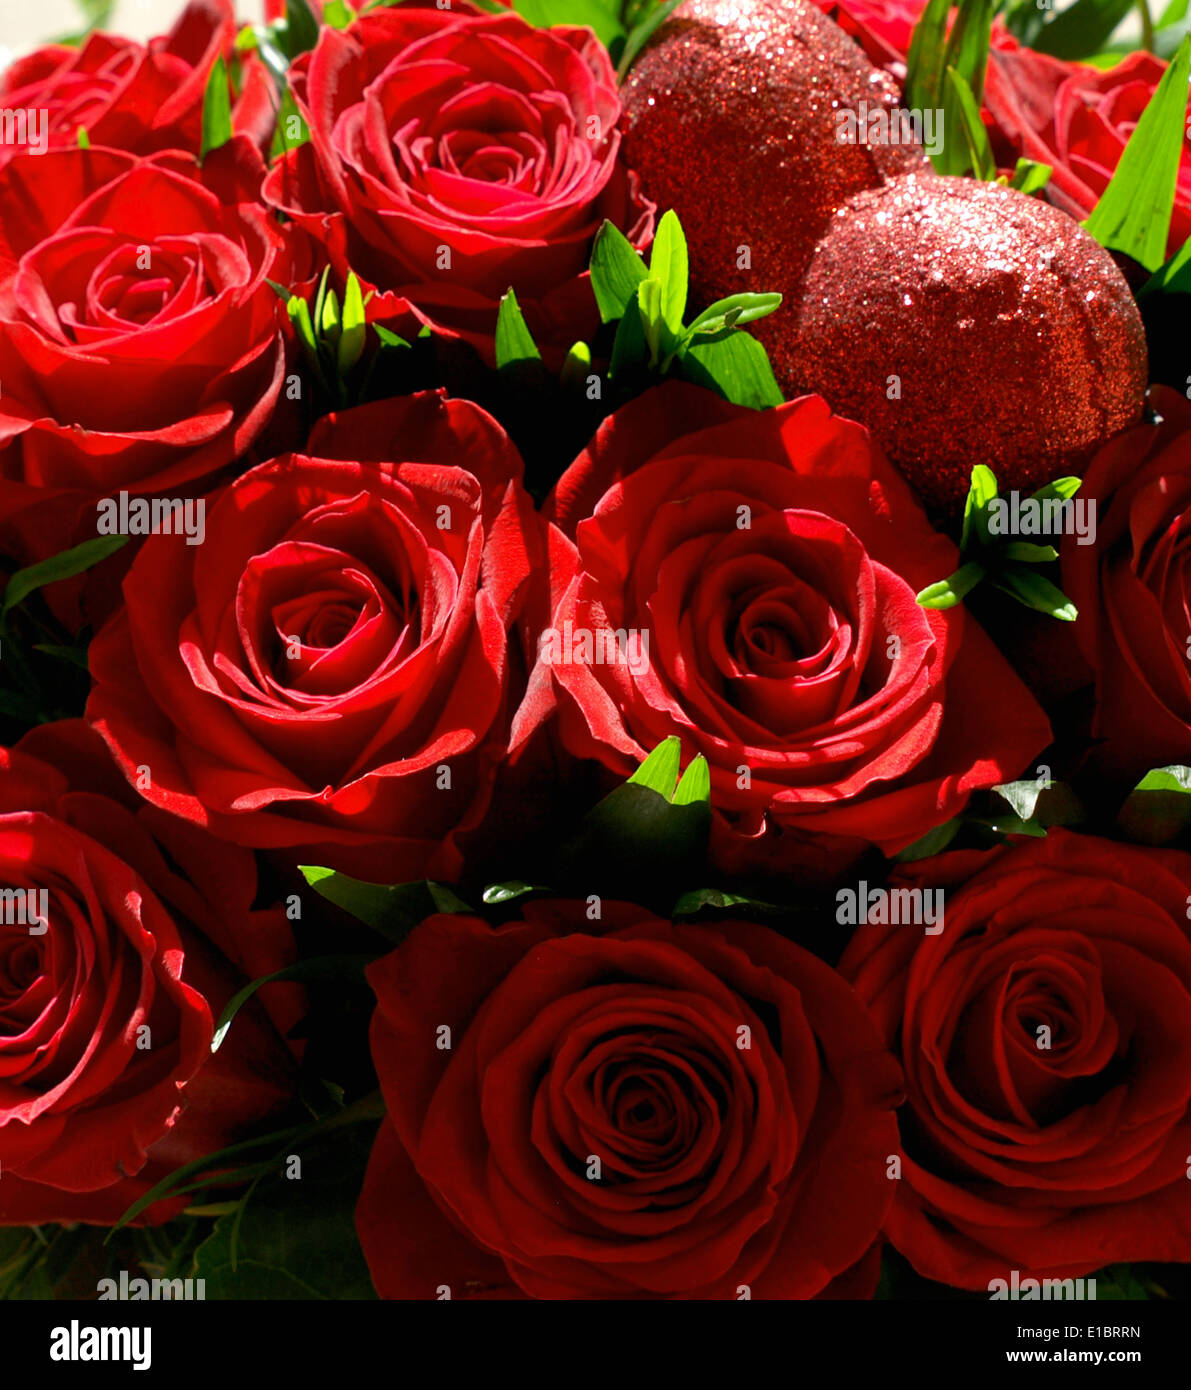 red roses for my love Stock Photo - Alamy